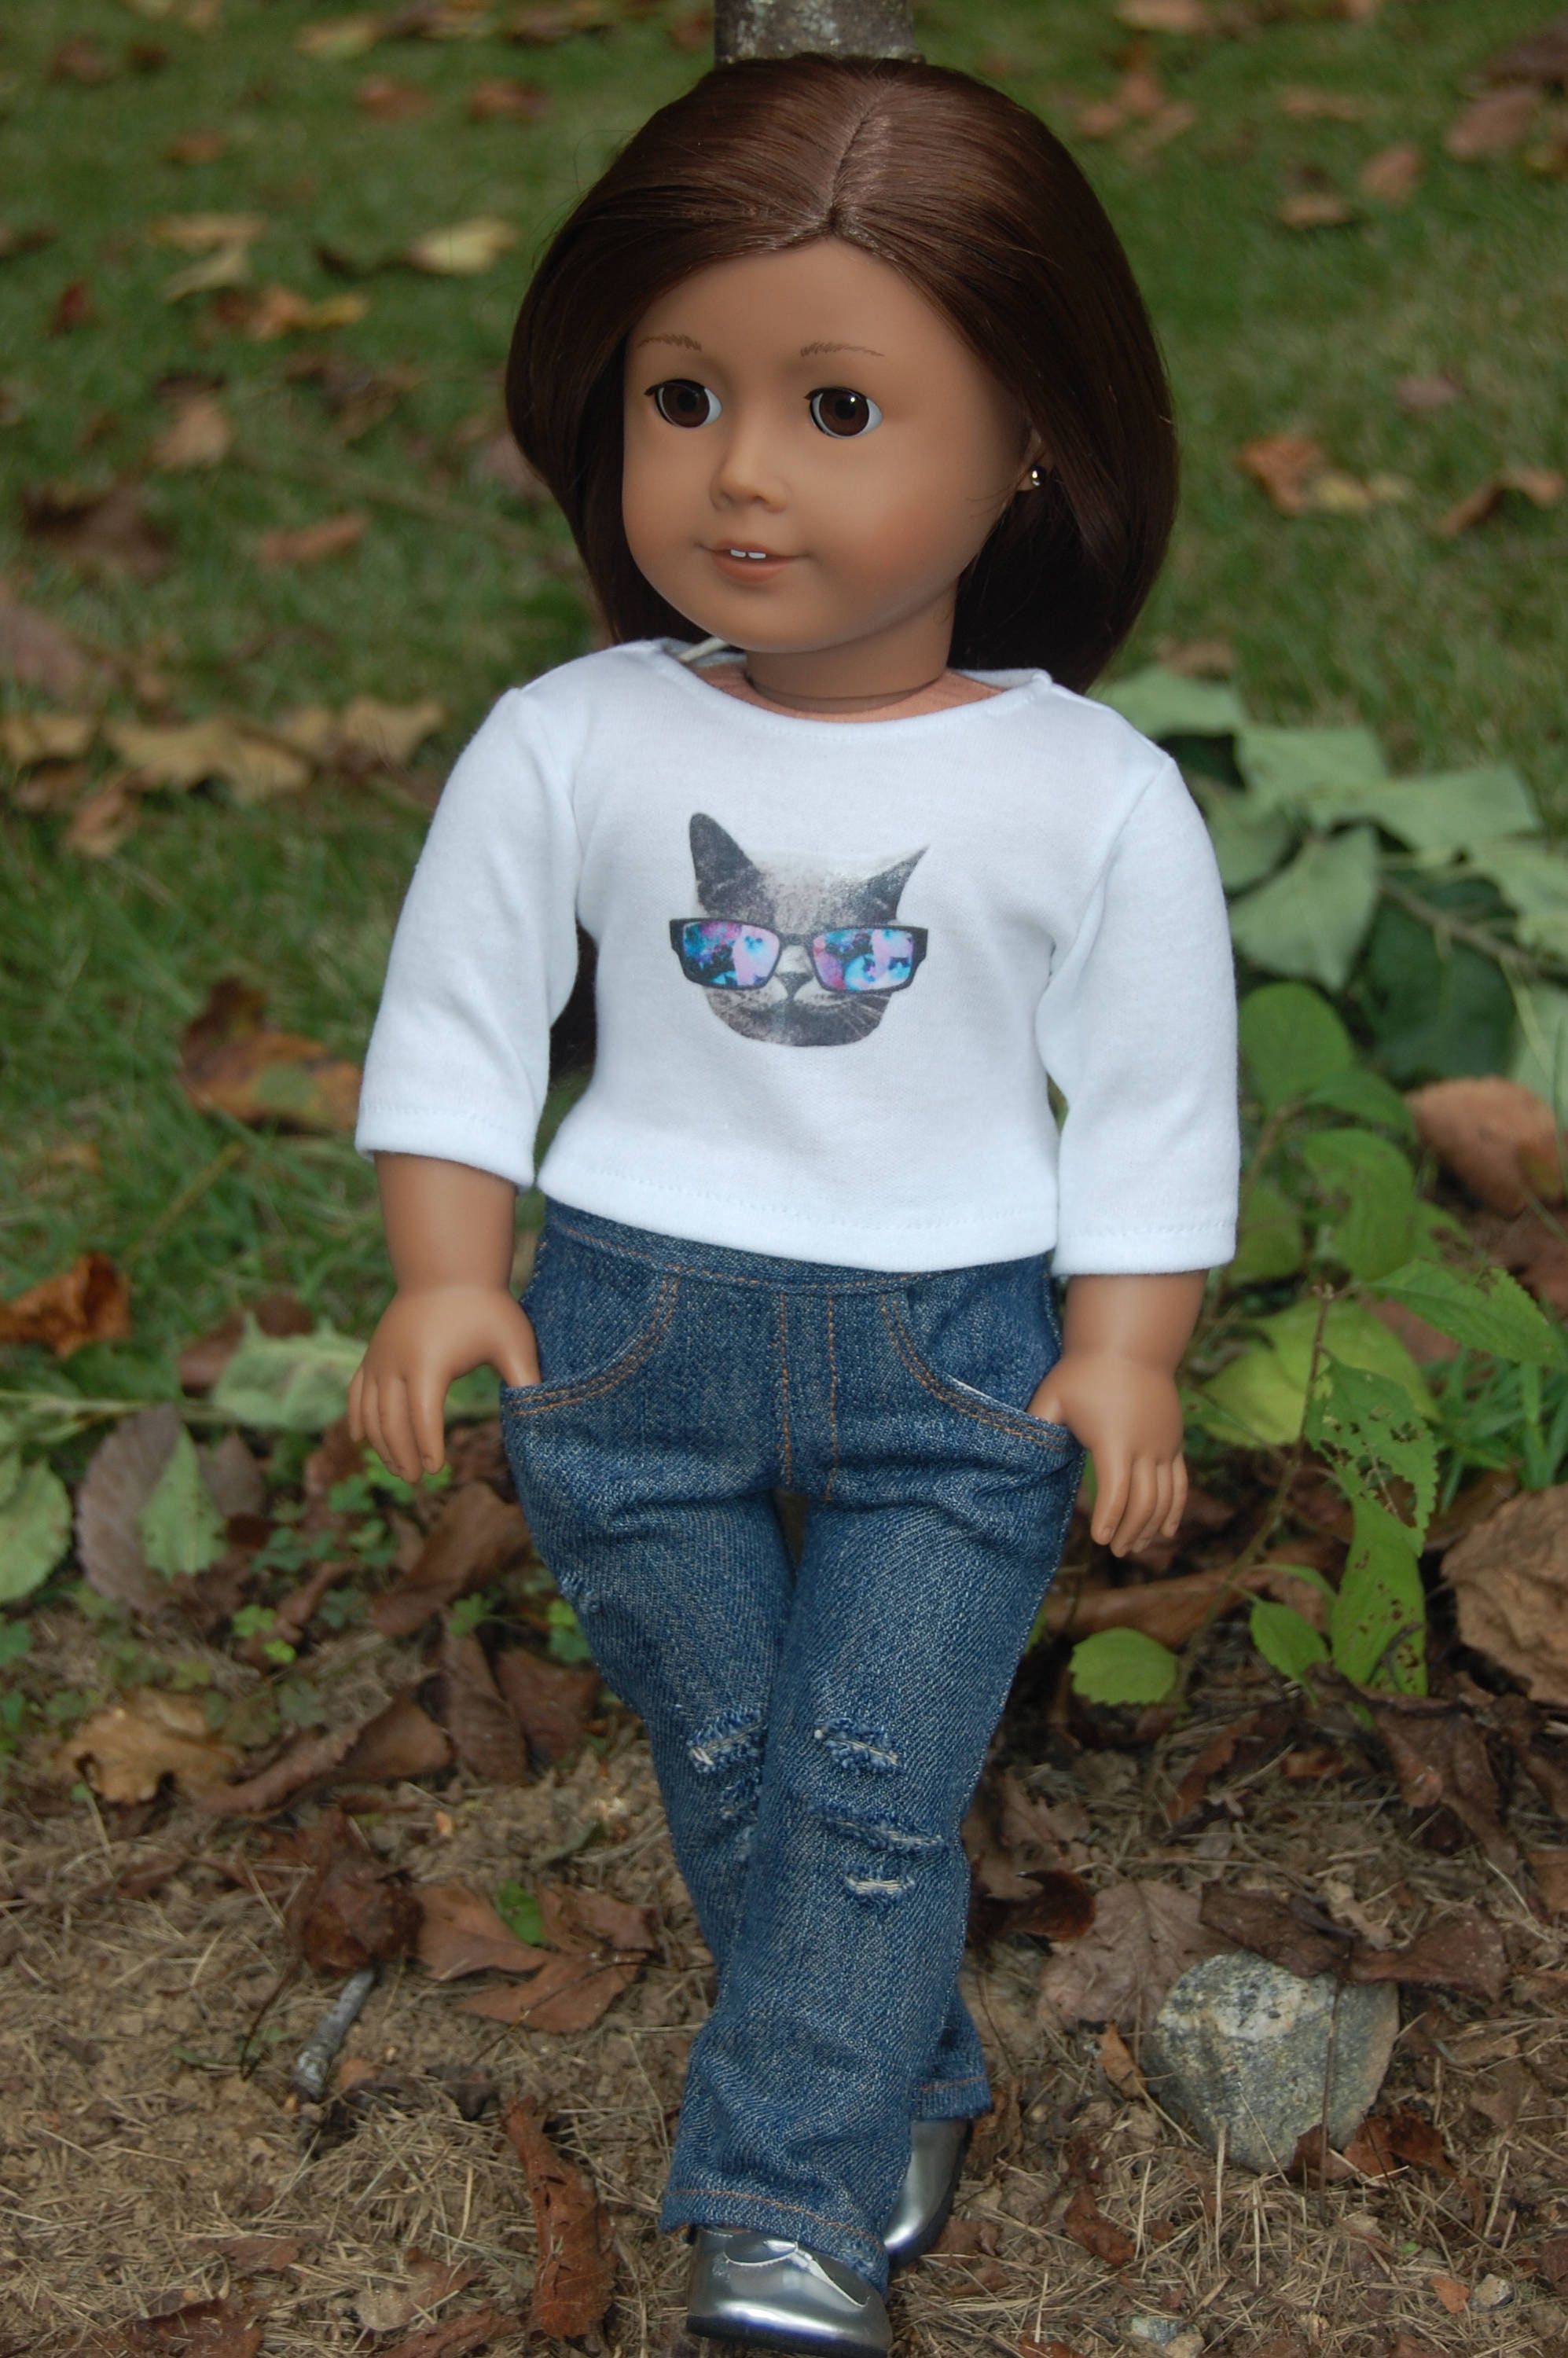 Sale Doll Tee Fits American Girl Doll Clothes 18 Inch Doll Etsy